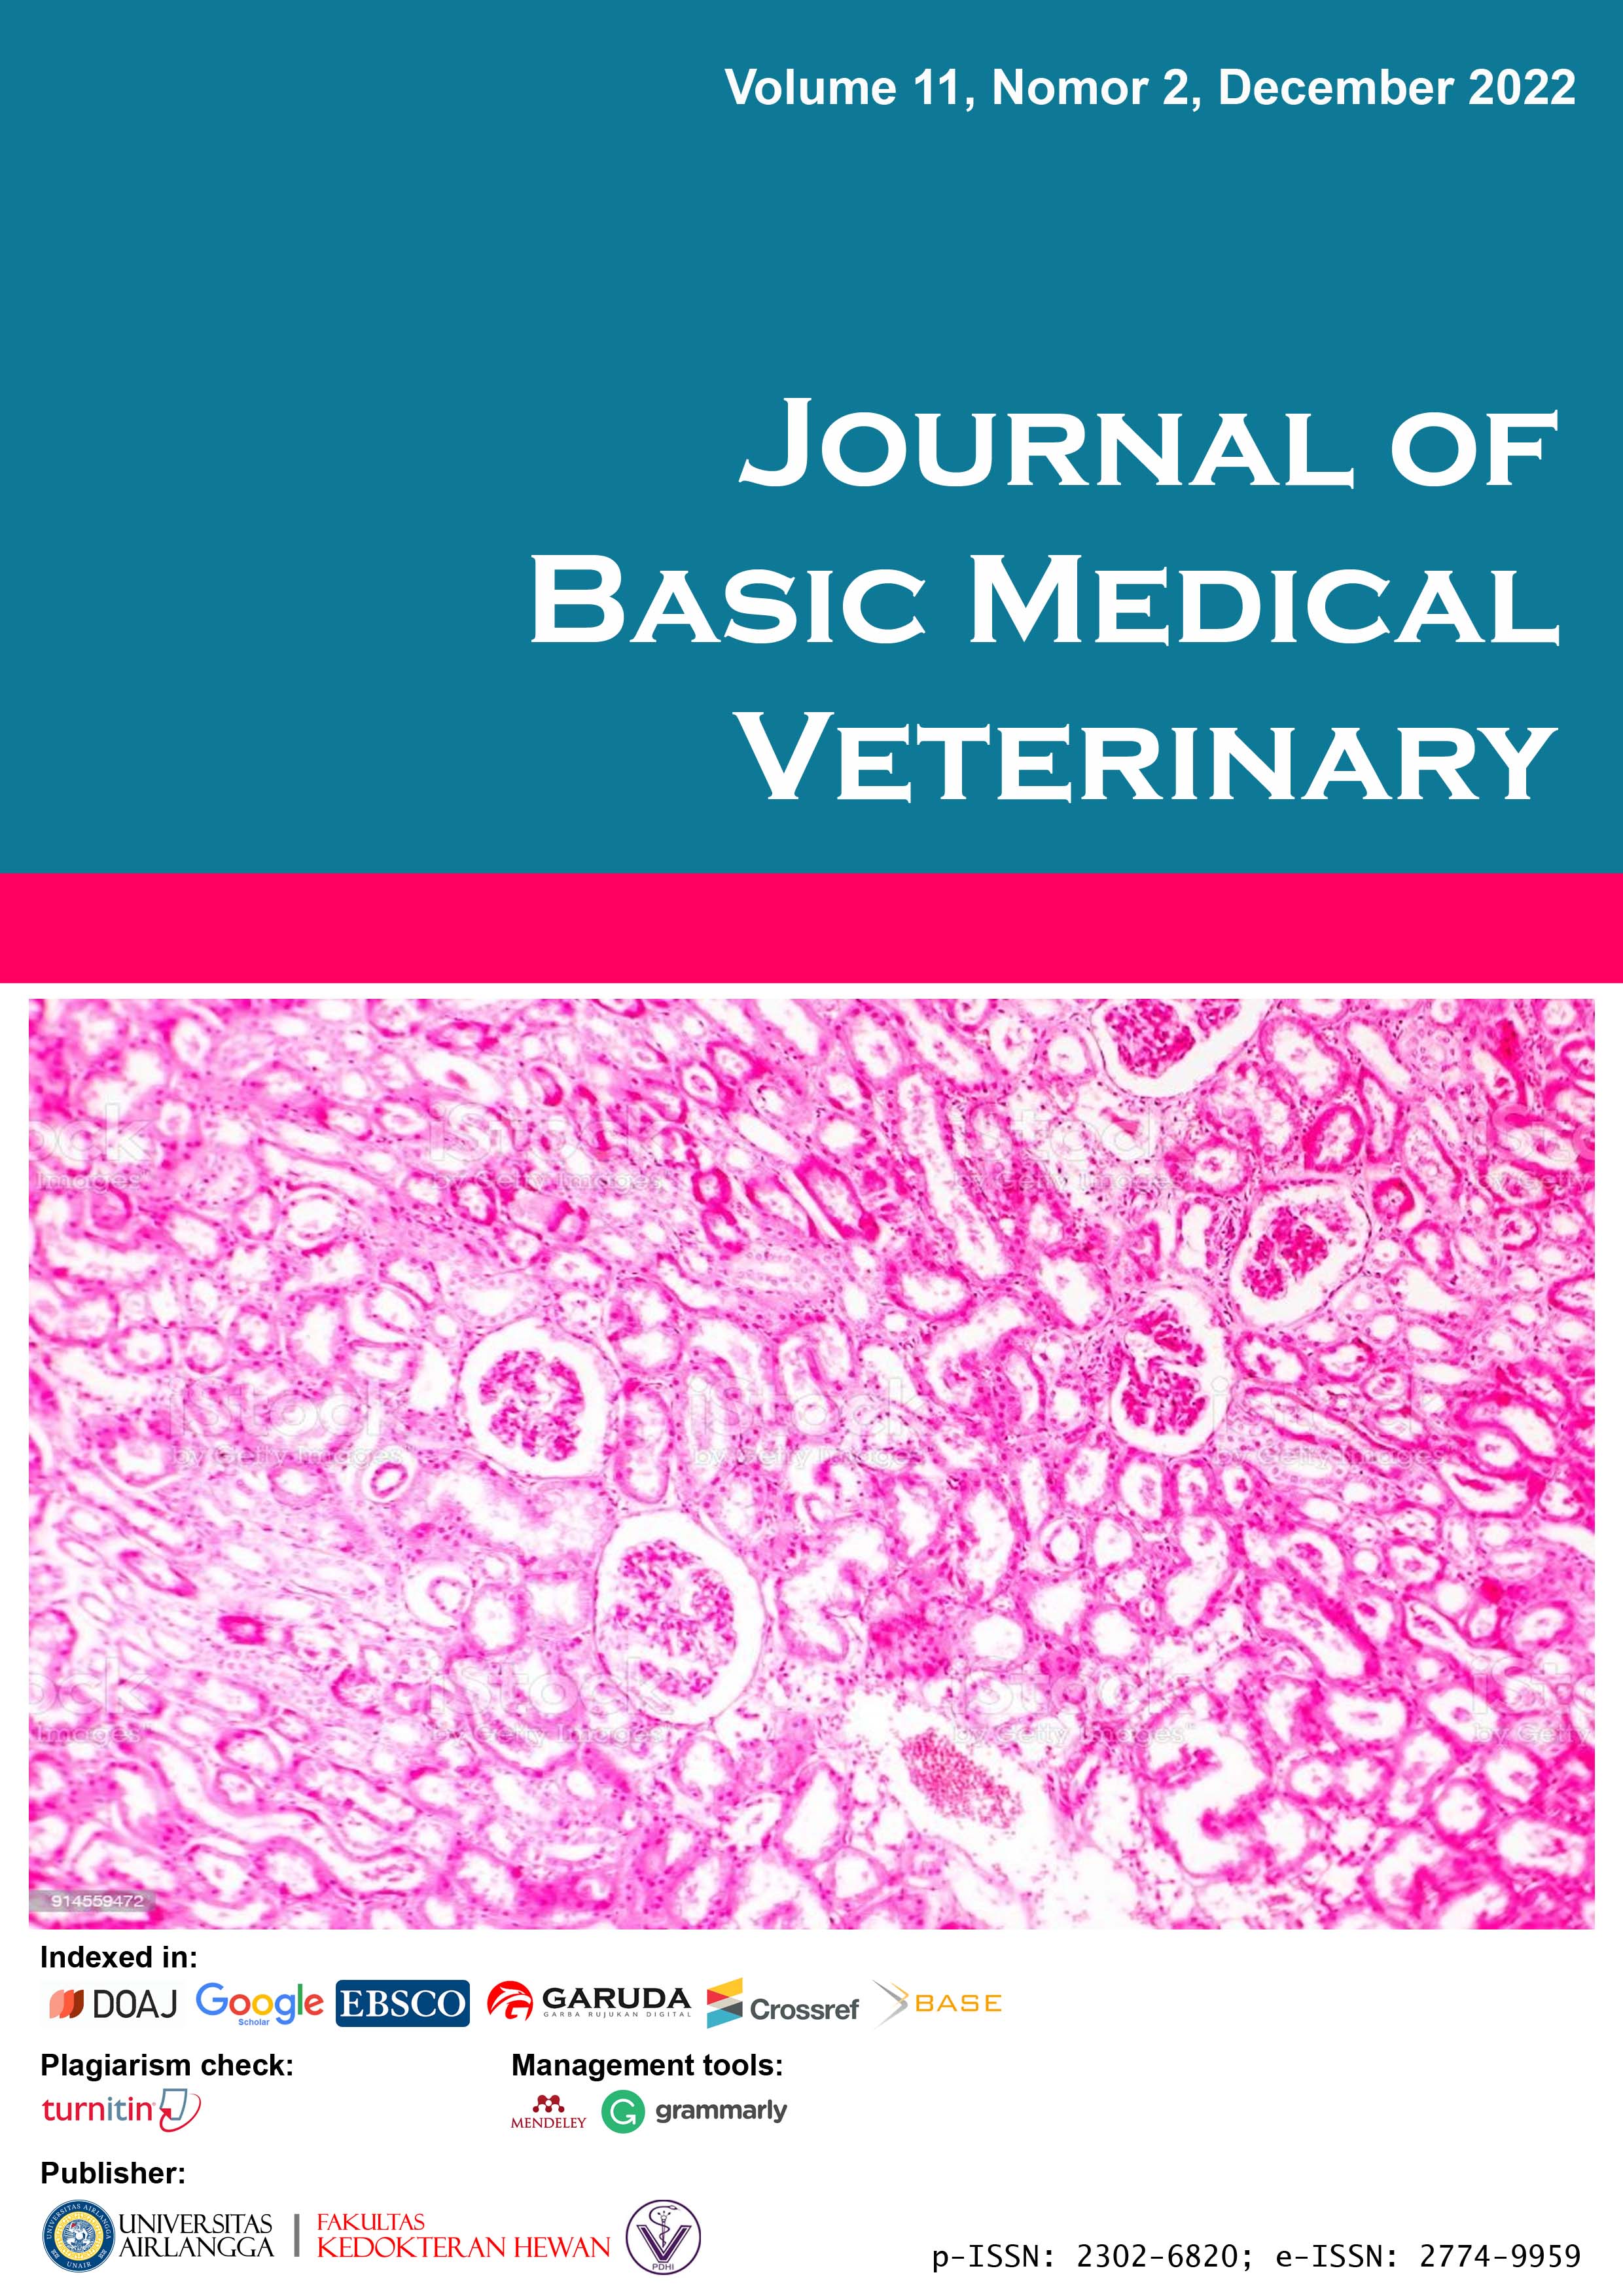 								View Vol. 11 No. 2 (2022): Journal of Basic Medical Veterinary, December 2022
							